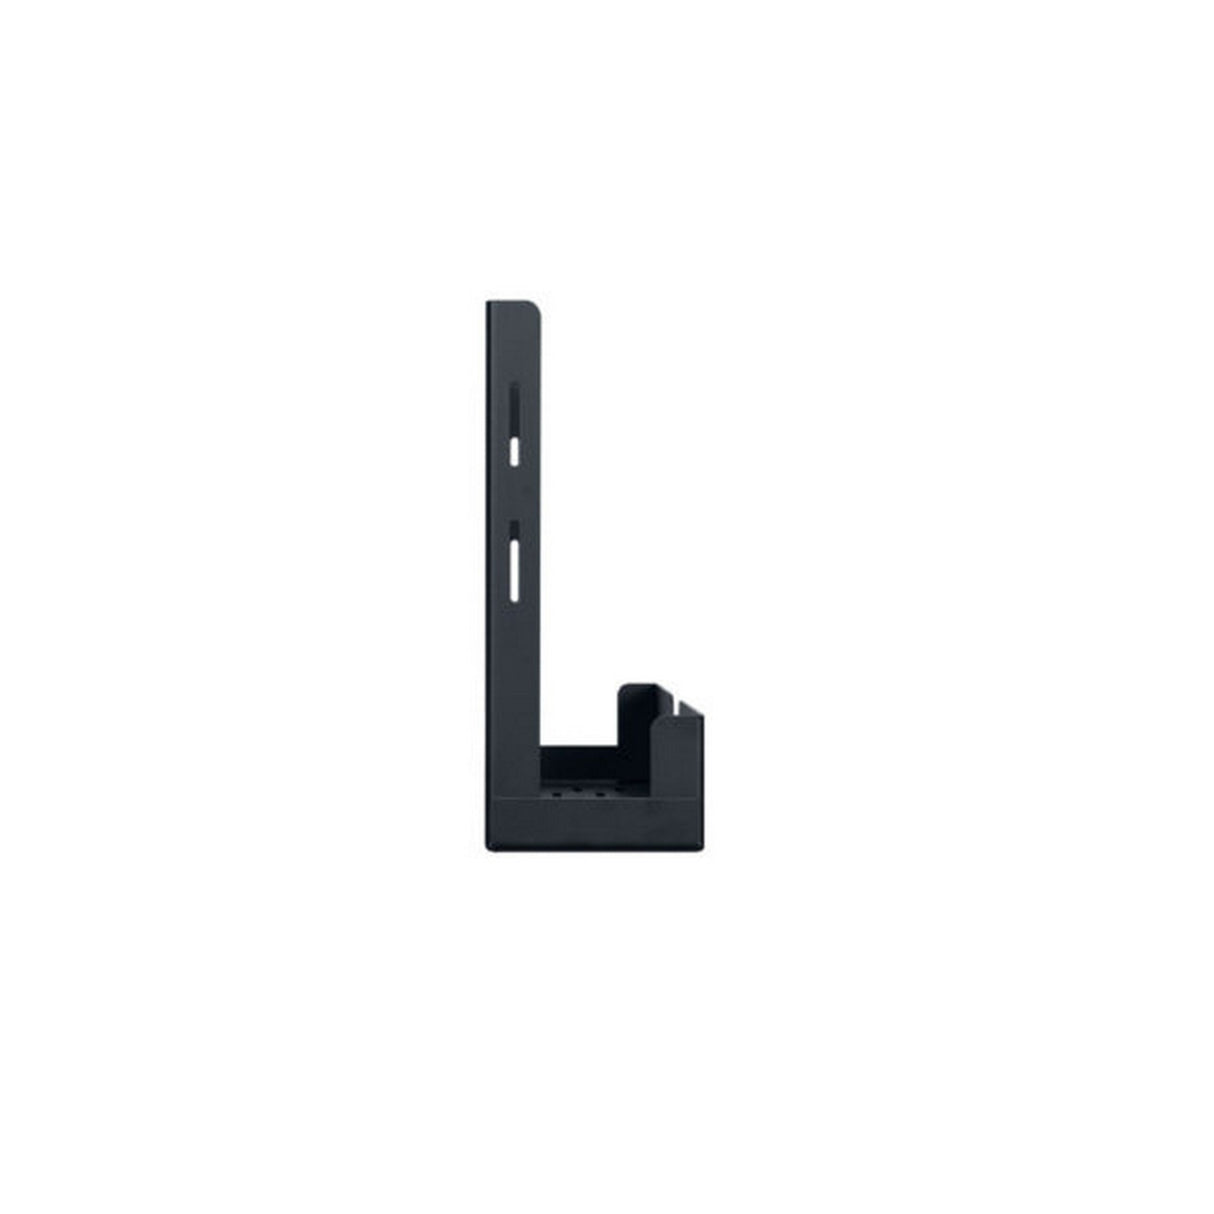 Lowell WMS-CPU-4 Shelf for Computer Tower, 4-Inch Depth